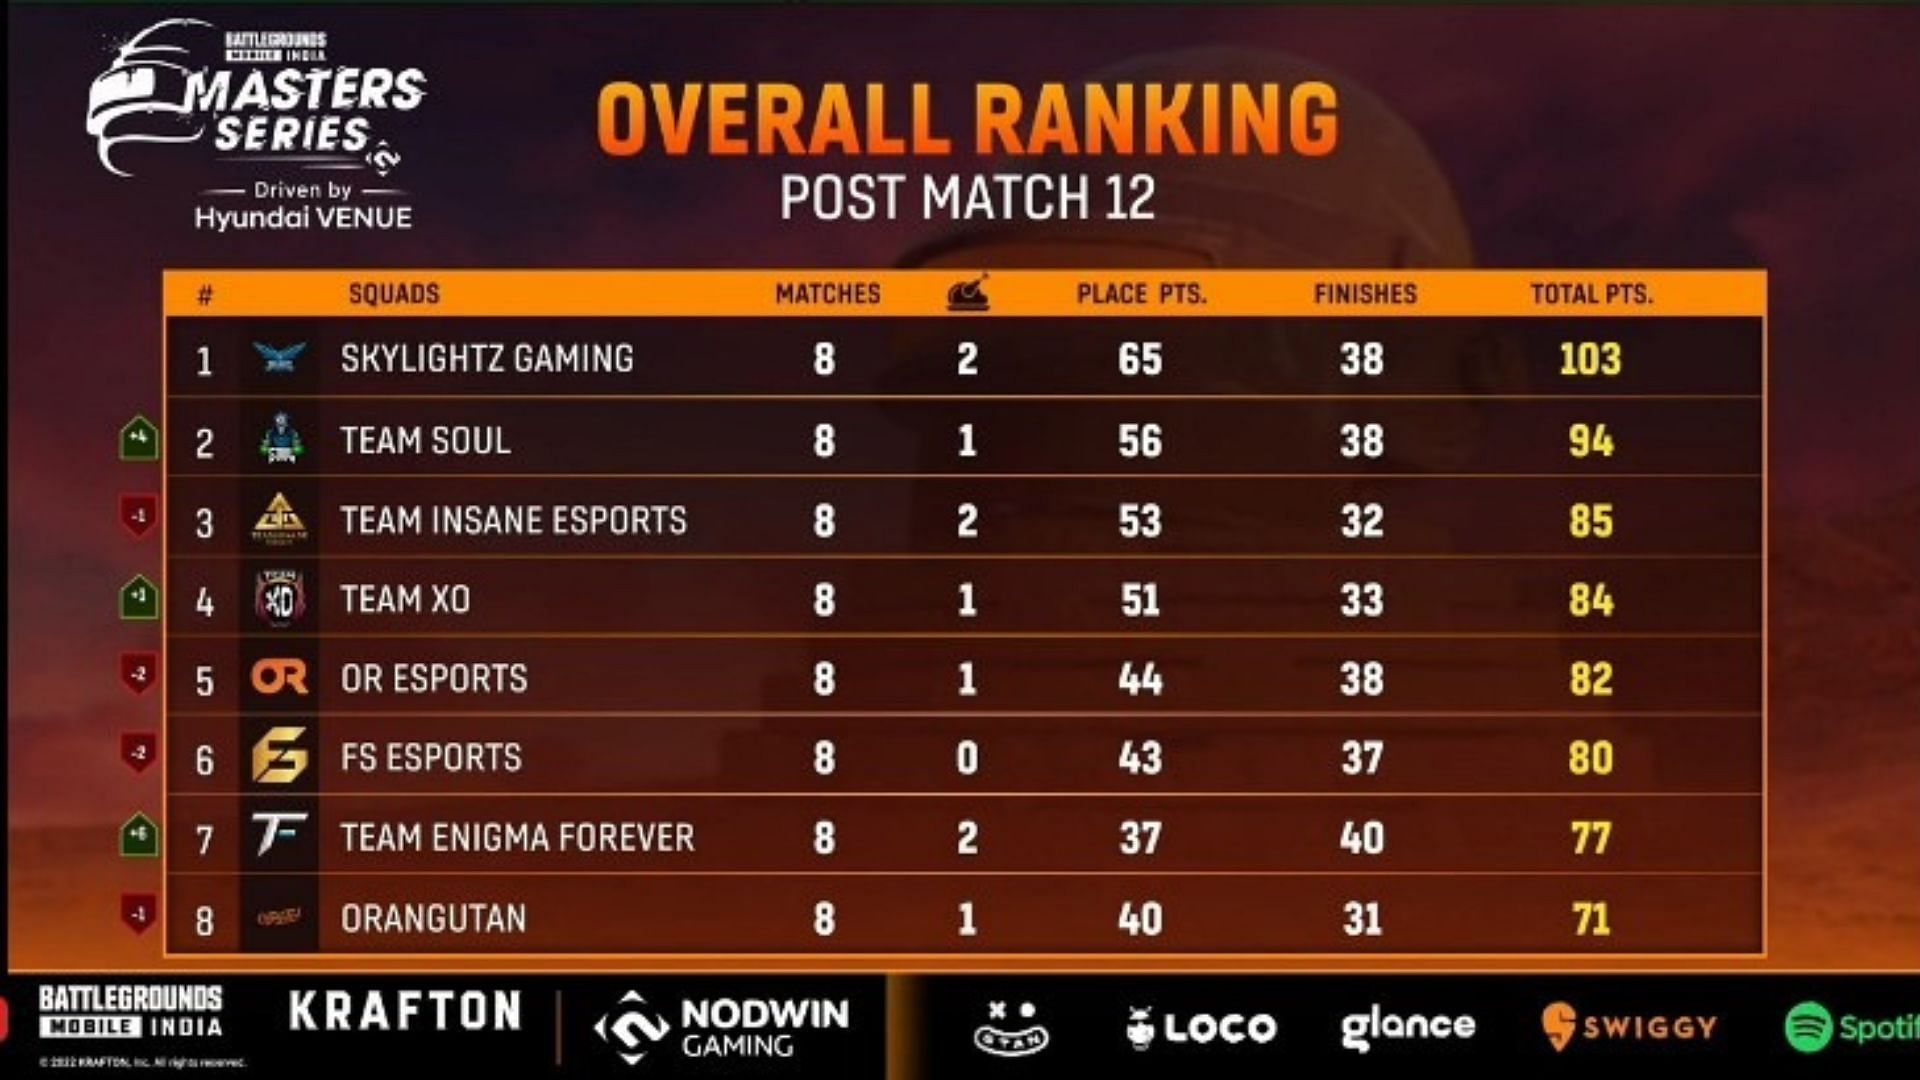 Skylightz Gaming finished first place in BGMI Masters Series Week 1 (image via Loco)